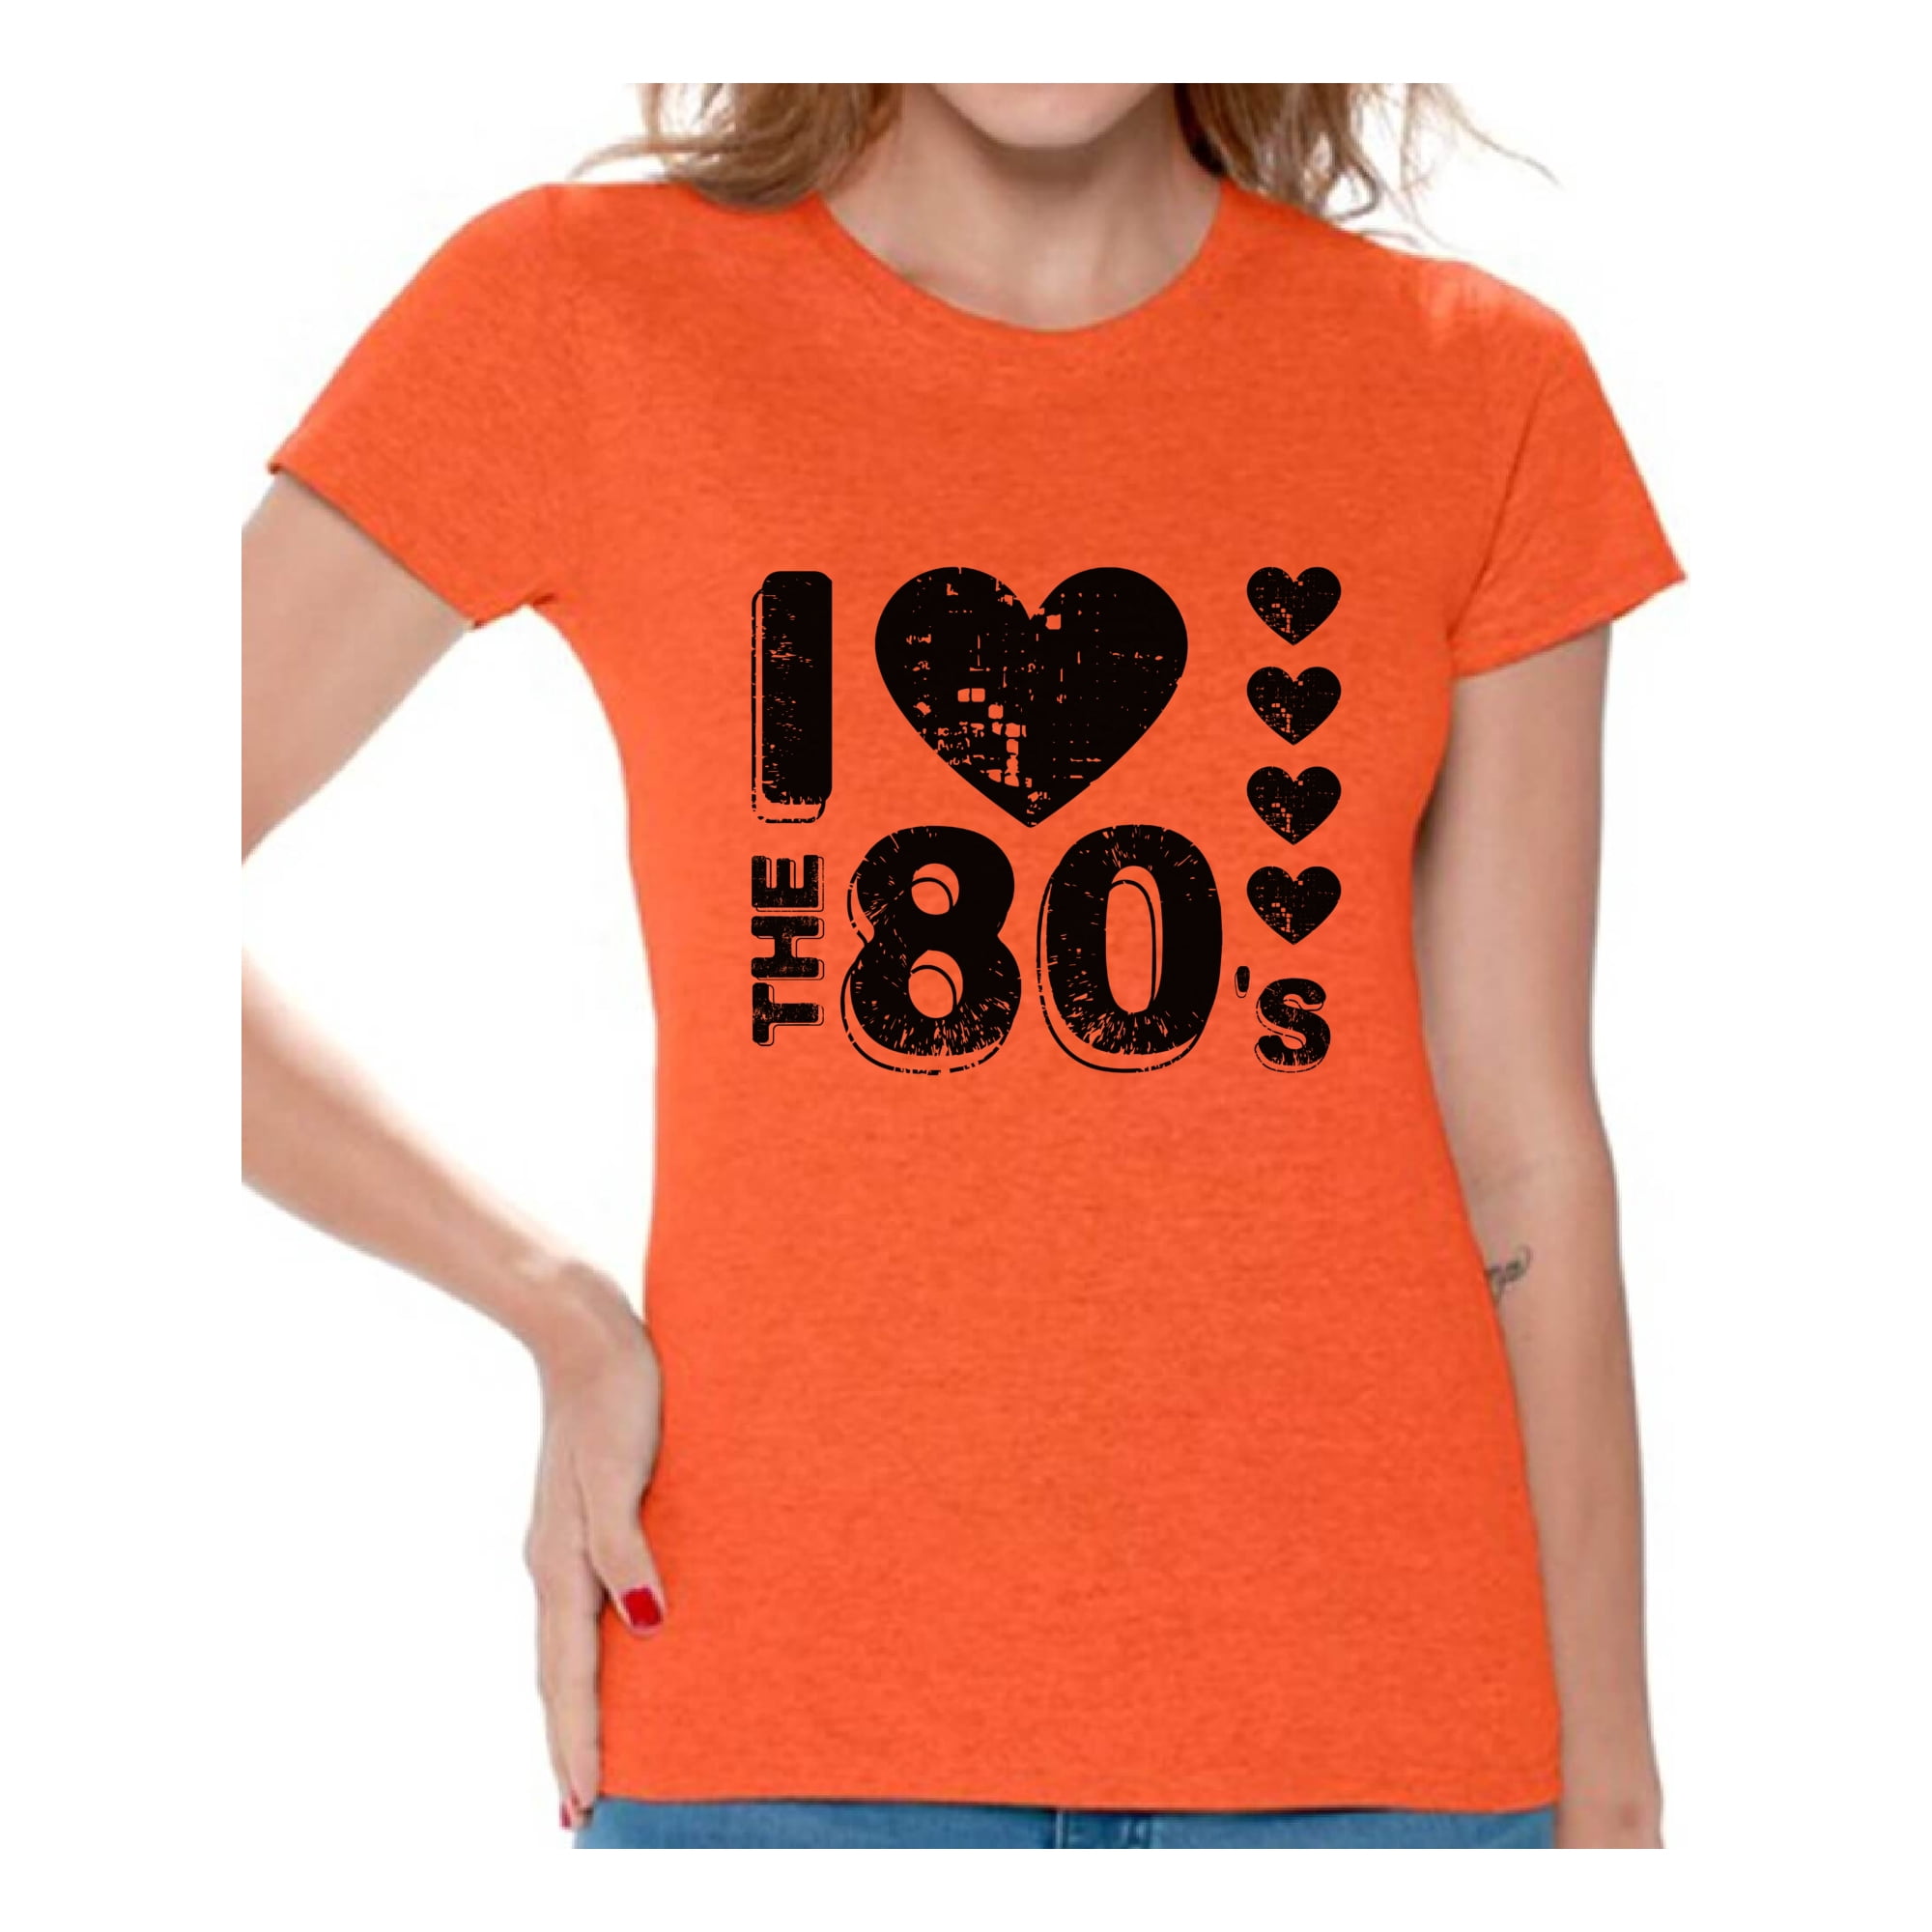 Awkward Styles I Love the 80s Shirt Black 80s Accessories 80s Rock T Shirt  80s T Shirt Retro Vintage Rock Concert T-Shirt 80s T Shirt for Women's 80s  Costumes 80s Outfit for